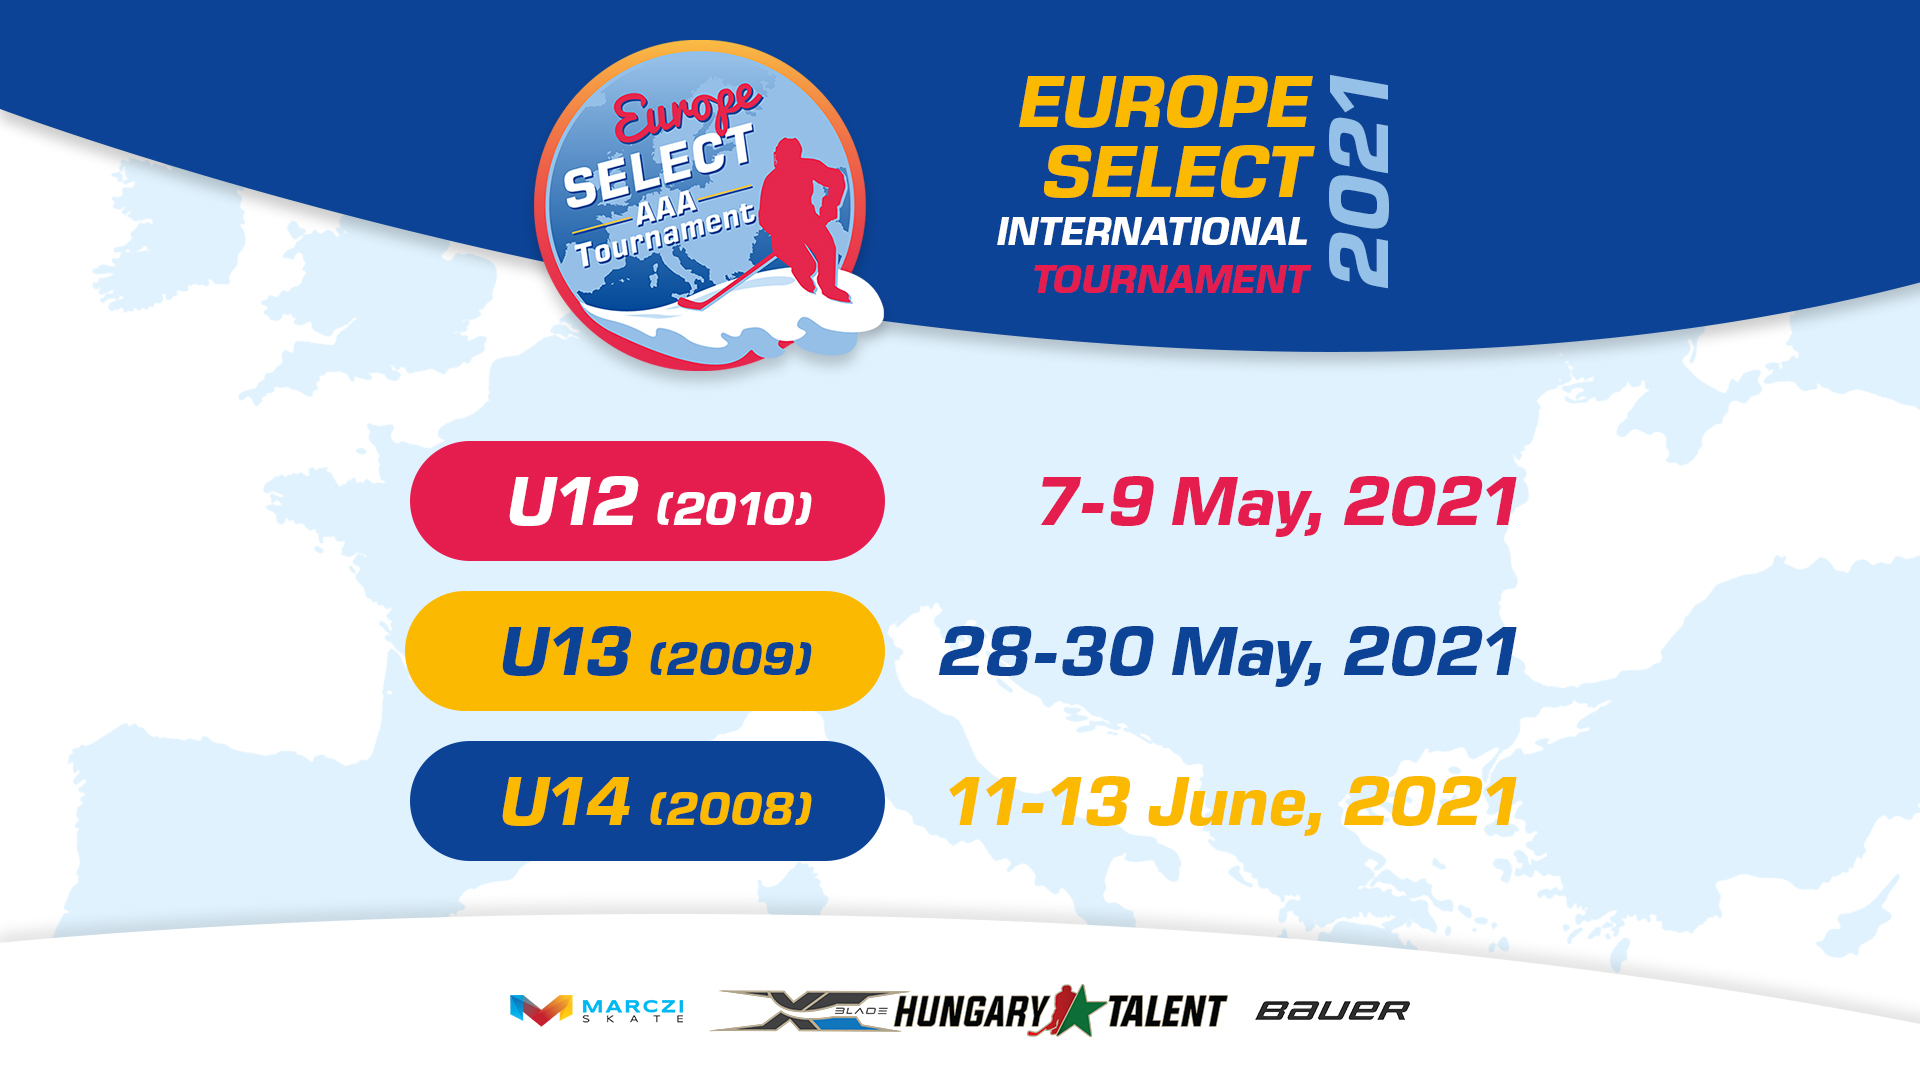 Europe Select Tournament website launched and the registration has started!